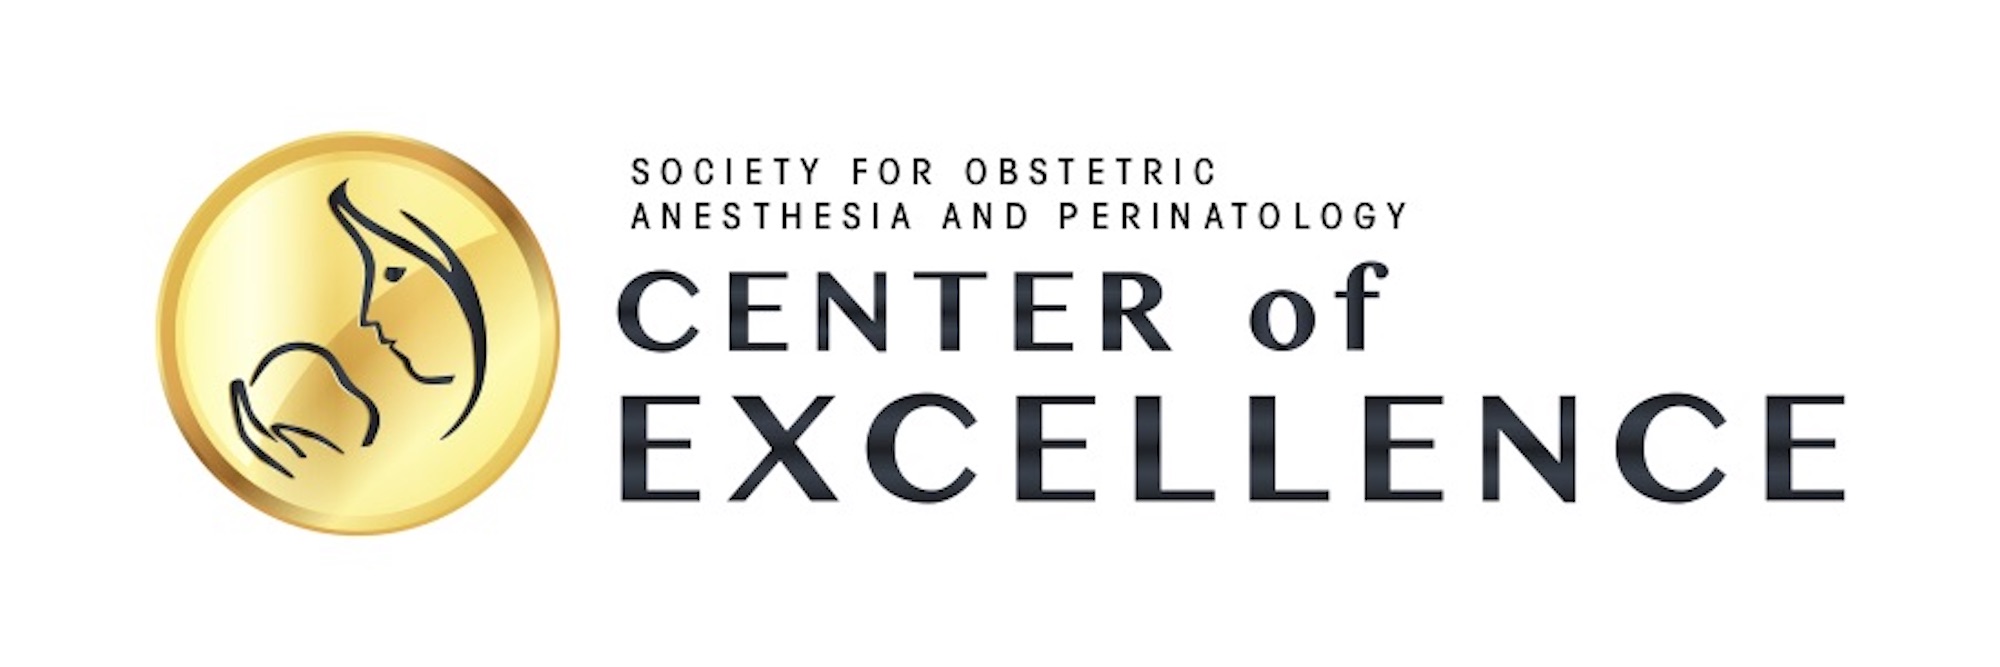 Society for Obstetric Anesthesia and Perinatology Center of Excellence